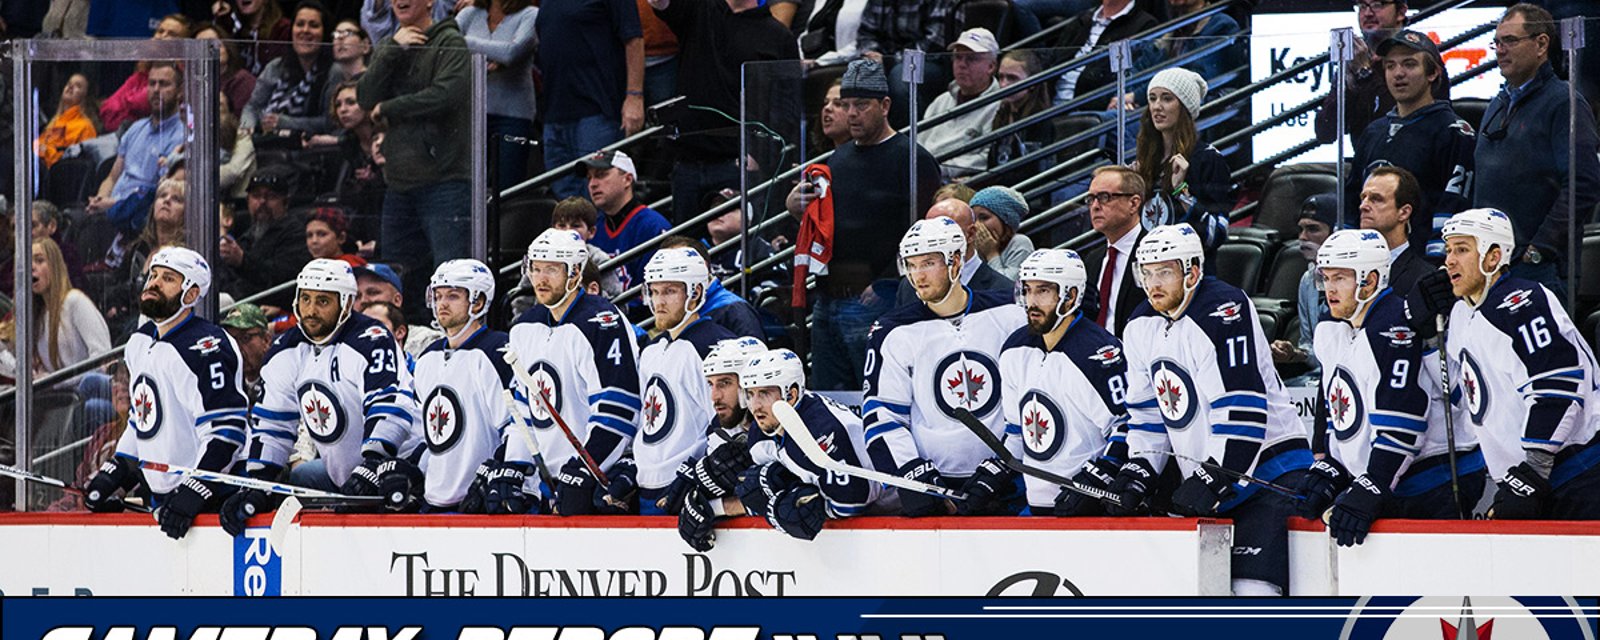 Report: More injuries to deal with in Winnipeg